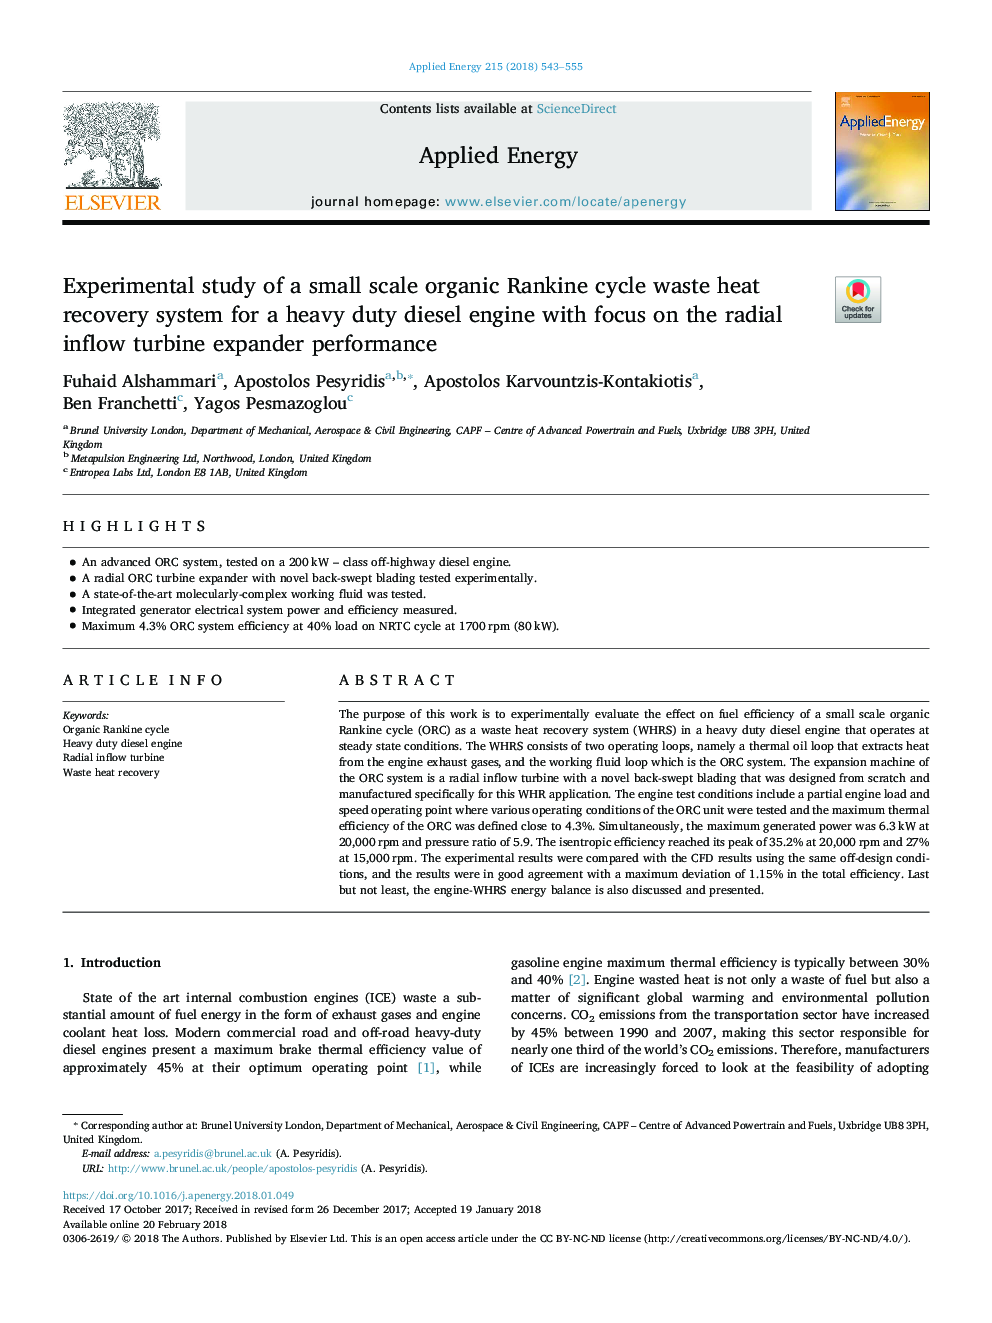 Experimental study of a small scale organic Rankine cycle waste heat recovery system for a heavy duty diesel engine with focus on the radial inflow turbine expander performance